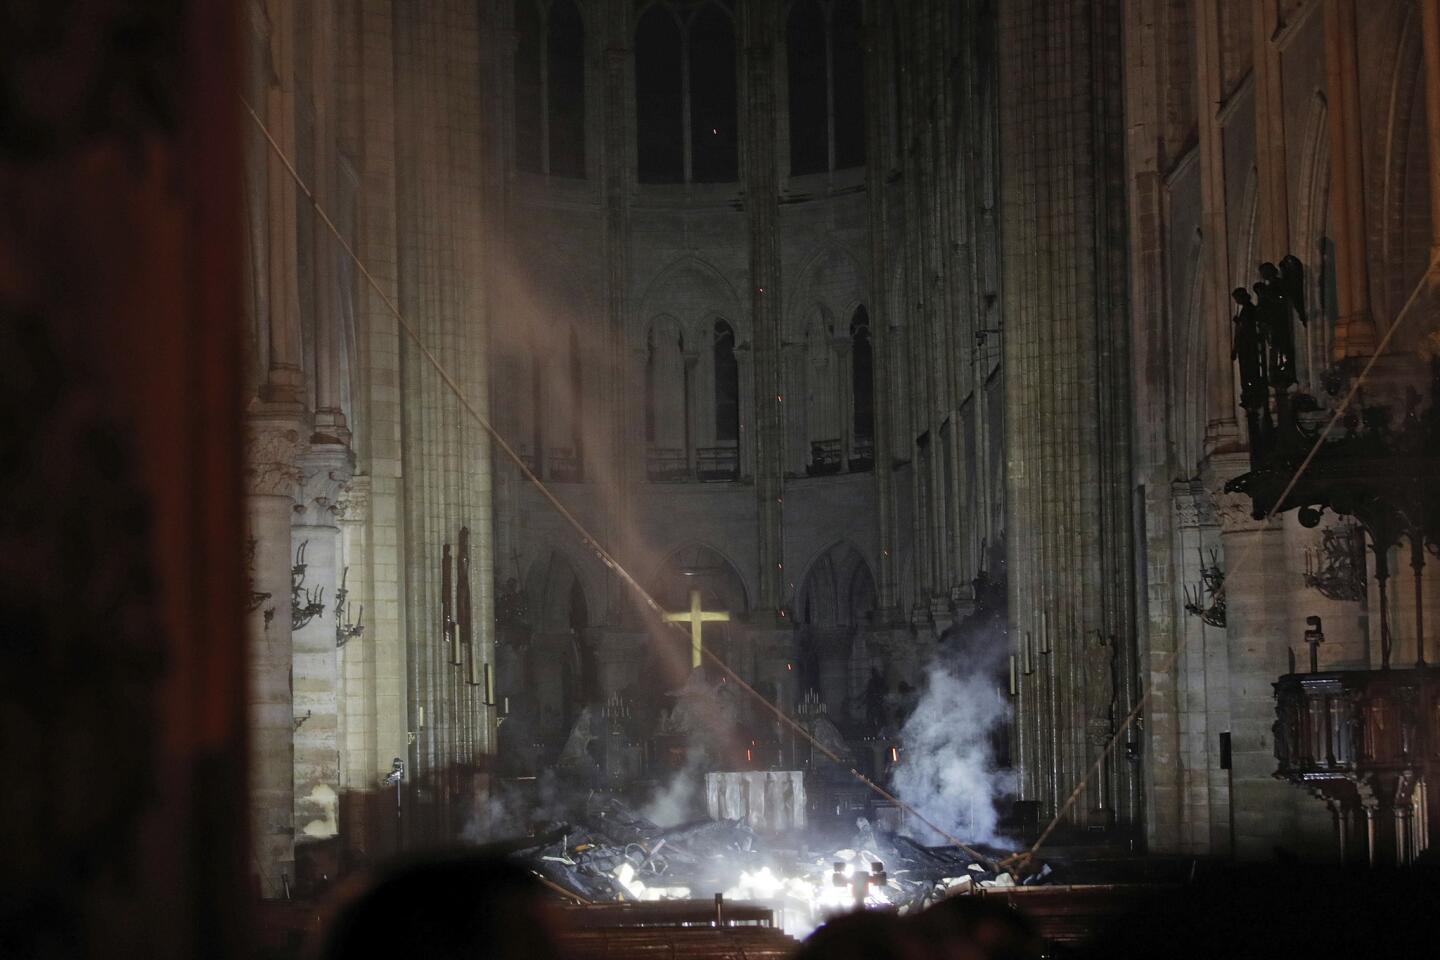 Notre Dame Cathedral fire